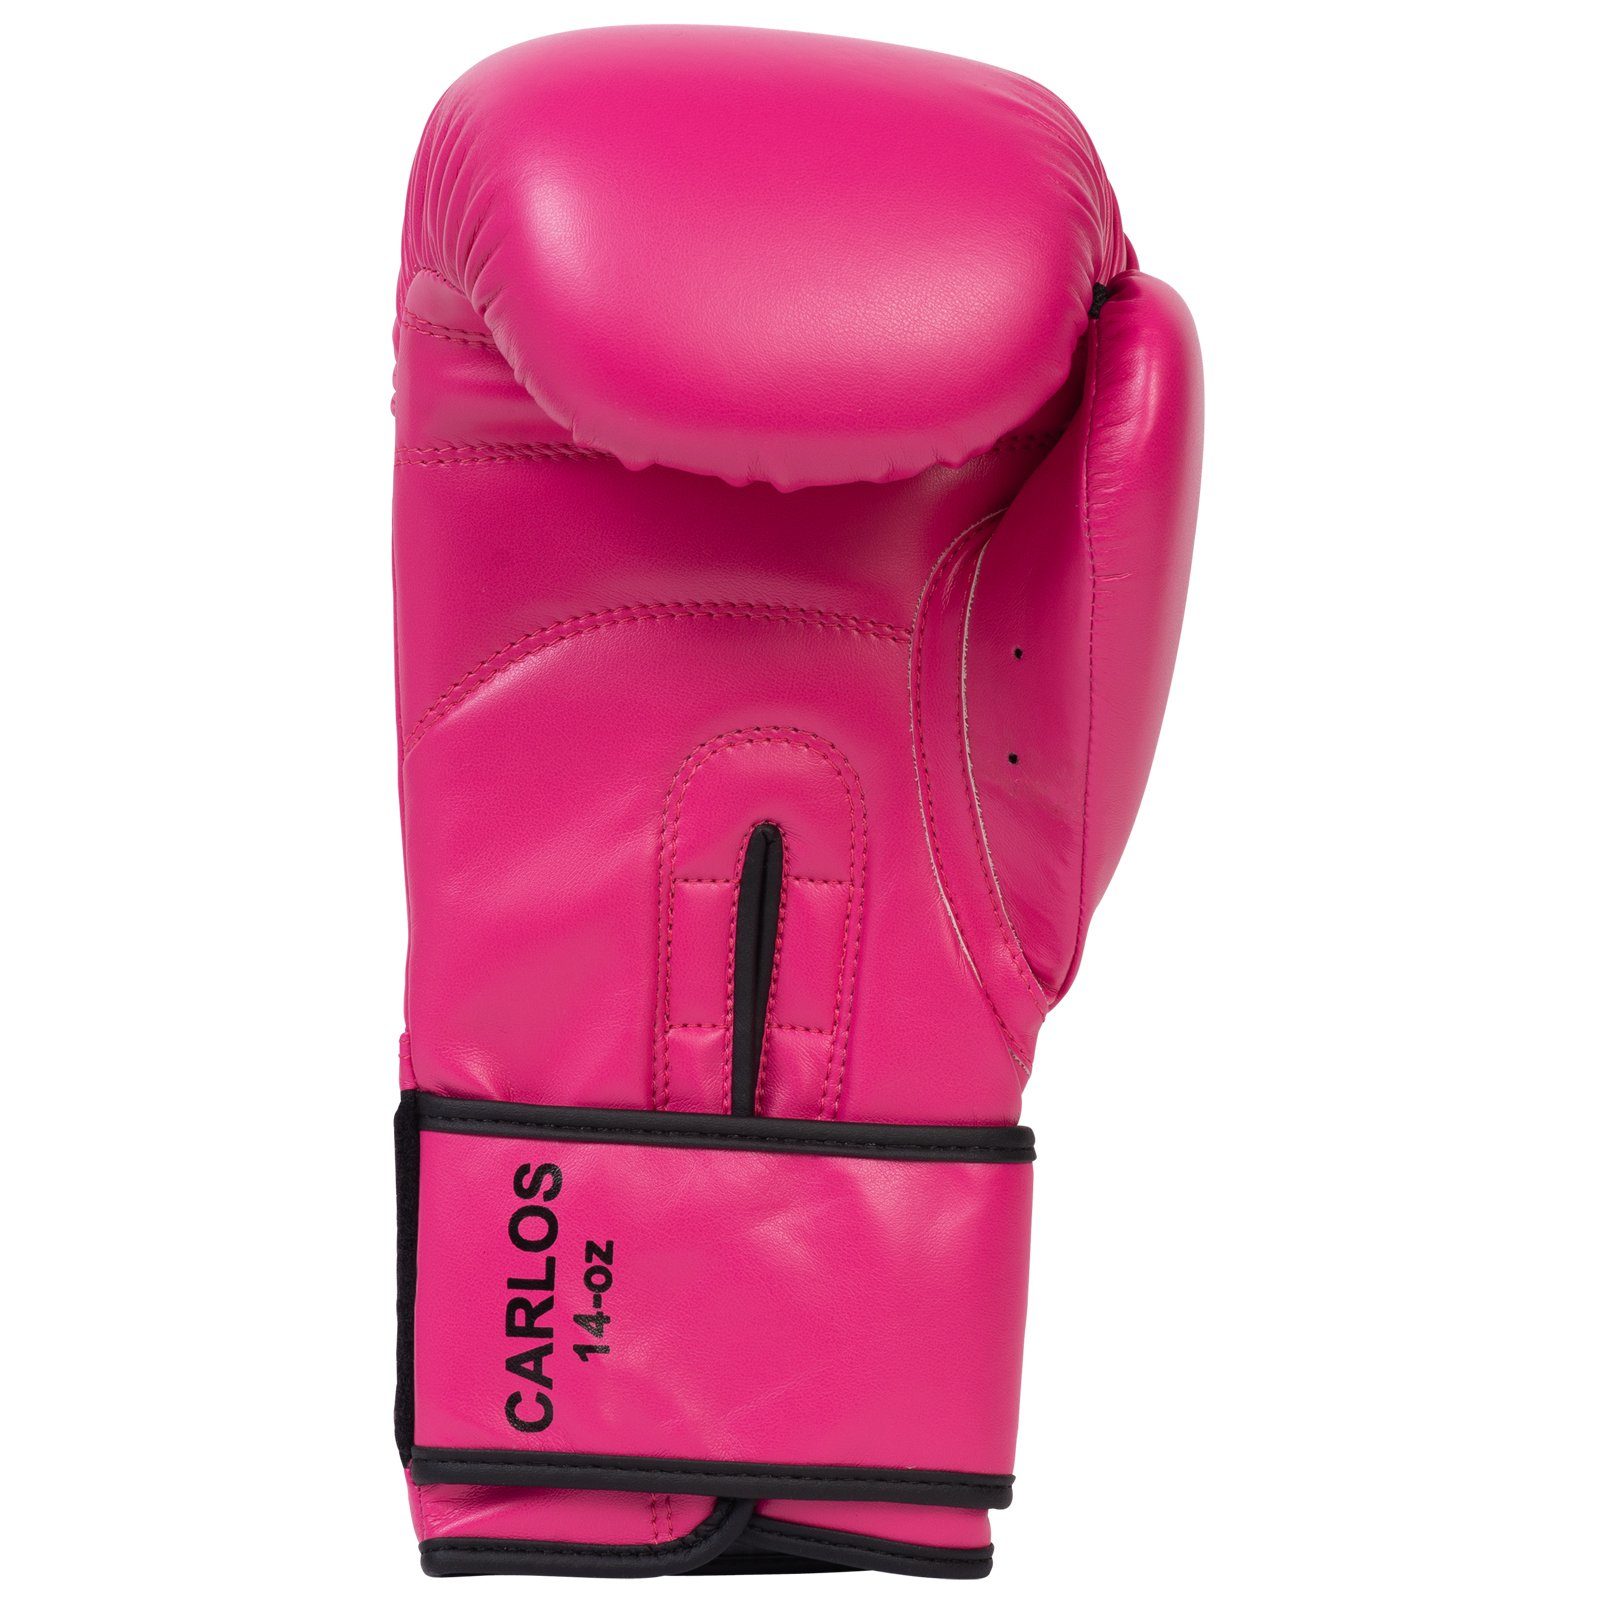 CARLOS Pink Boxhandschuhe Marciano Rocky Benlee